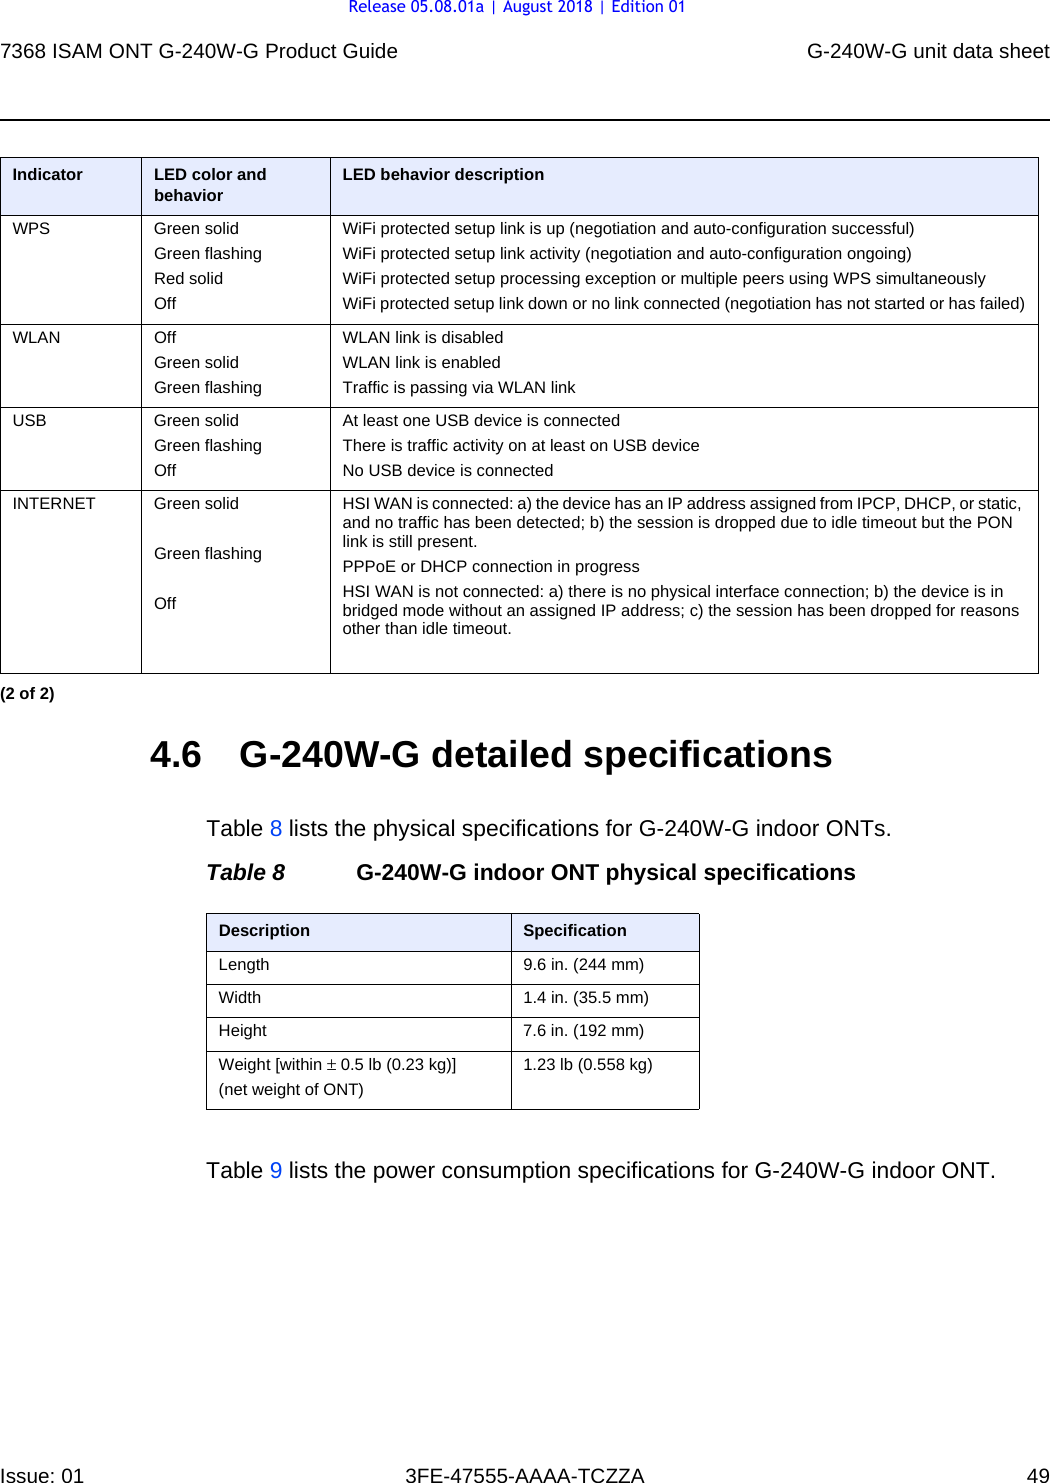 7368 ISAM ONT G-240W-G Product Guide G-240W-G unit data sheetIssue: 01 3FE-47555-AAAA-TCZZA 49 4.6 G-240W-G detailed specificationsTable 8 lists the physical specifications for G-240W-G indoor ONTs.Table 8 G-240W-G indoor ONT physical specificationsTable 9 lists the power consumption specifications for G-240W-G indoor ONT.WPS Green solidGreen flashingRed solidOffWiFi protected setup link is up (negotiation and auto-configuration successful)WiFi protected setup link activity (negotiation and auto-configuration ongoing)WiFi protected setup processing exception or multiple peers using WPS simultaneouslyWiFi protected setup link down or no link connected (negotiation has not started or has failed)WLAN OffGreen solidGreen flashingWLAN link is disabledWLAN link is enabledTraffic is passing via WLAN linkUSB Green solidGreen flashingOffAt least one USB device is connectedThere is traffic activity on at least on USB deviceNo USB device is connectedINTERNET Green solid Green flashingOffHSI WAN is connected: a) the device has an IP address assigned from IPCP, DHCP, or static, and no traffic has been detected; b) the session is dropped due to idle timeout but the PON link is still present.PPPoE or DHCP connection in progressHSI WAN is not connected: a) there is no physical interface connection; b) the device is in bridged mode without an assigned IP address; c) the session has been dropped for reasons other than idle timeout.Indicator LED color and behavior LED behavior description(2 of 2)Description SpecificationLength 9.6 in. (244 mm)Width 1.4 in. (35.5 mm)Height 7.6 in. (192 mm)Weight [within ± 0.5 lb (0.23 kg)](net weight of ONT)1.23 lb (0.558 kg)Release 05.08.01a | August 2018 | Edition 01